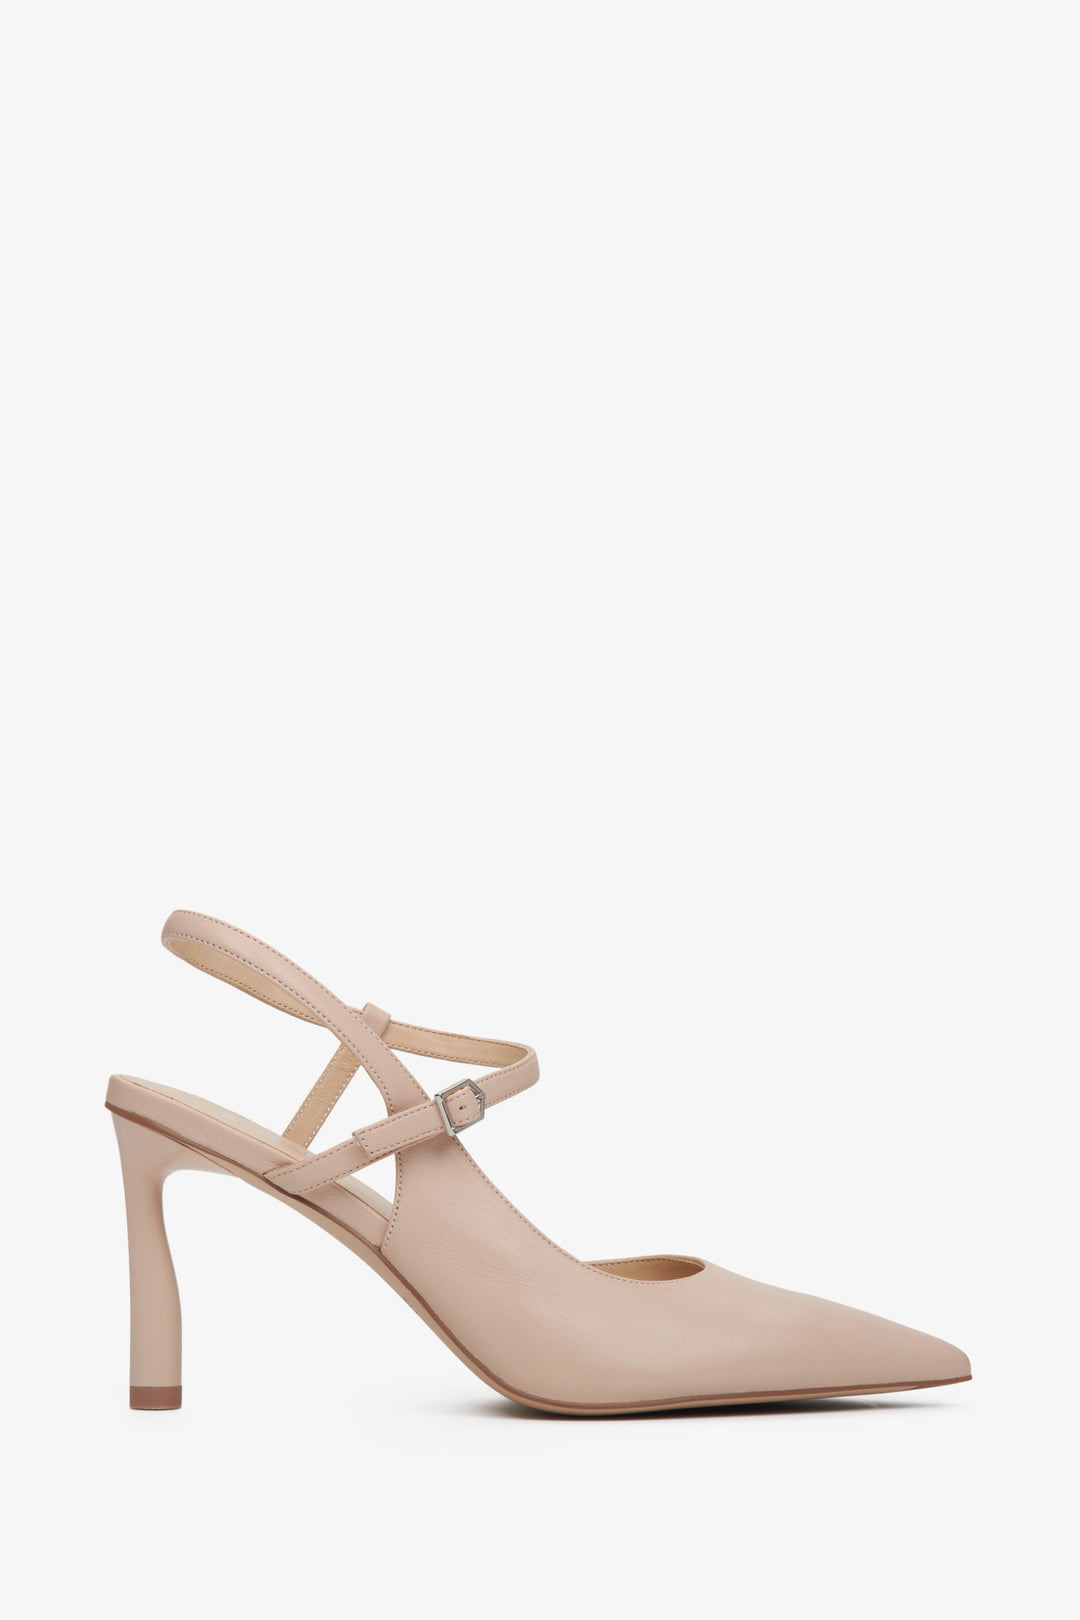 Beige Leather Women's Slingback Heels with Pointed Toe Estro ER00113226